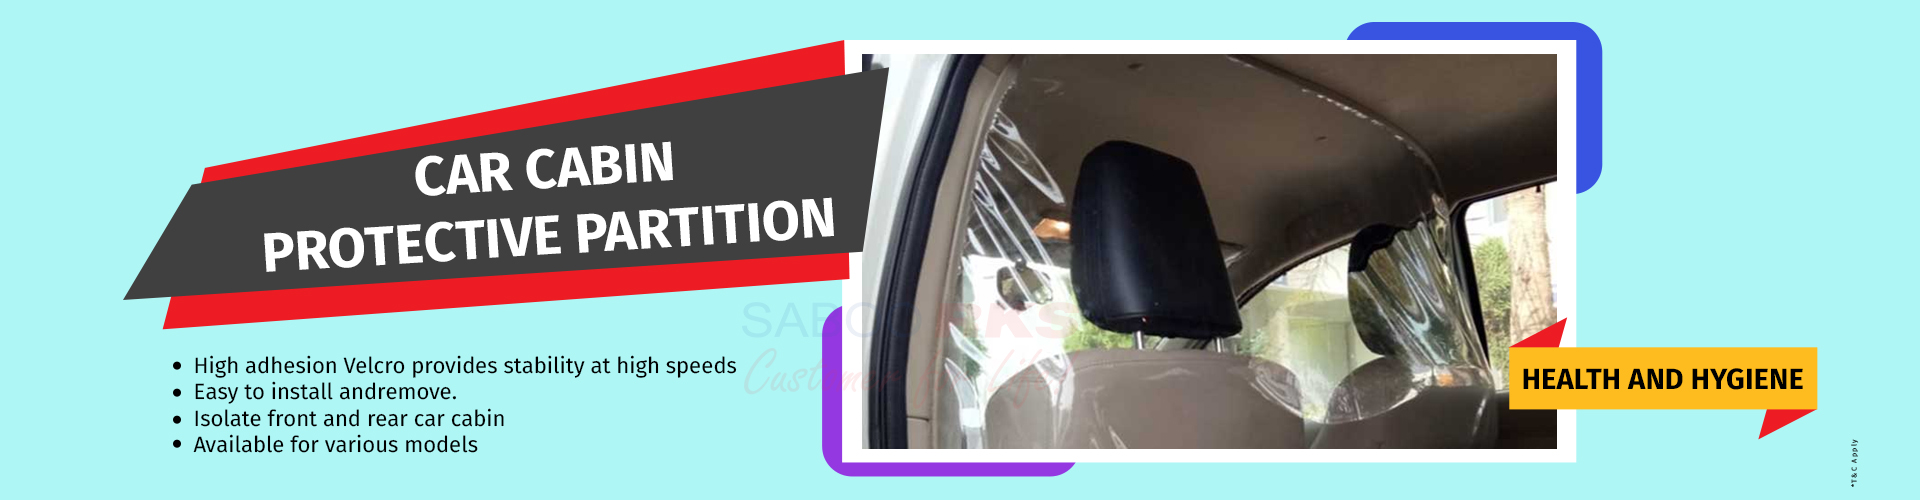 Car-Cabin-Protective-Partition